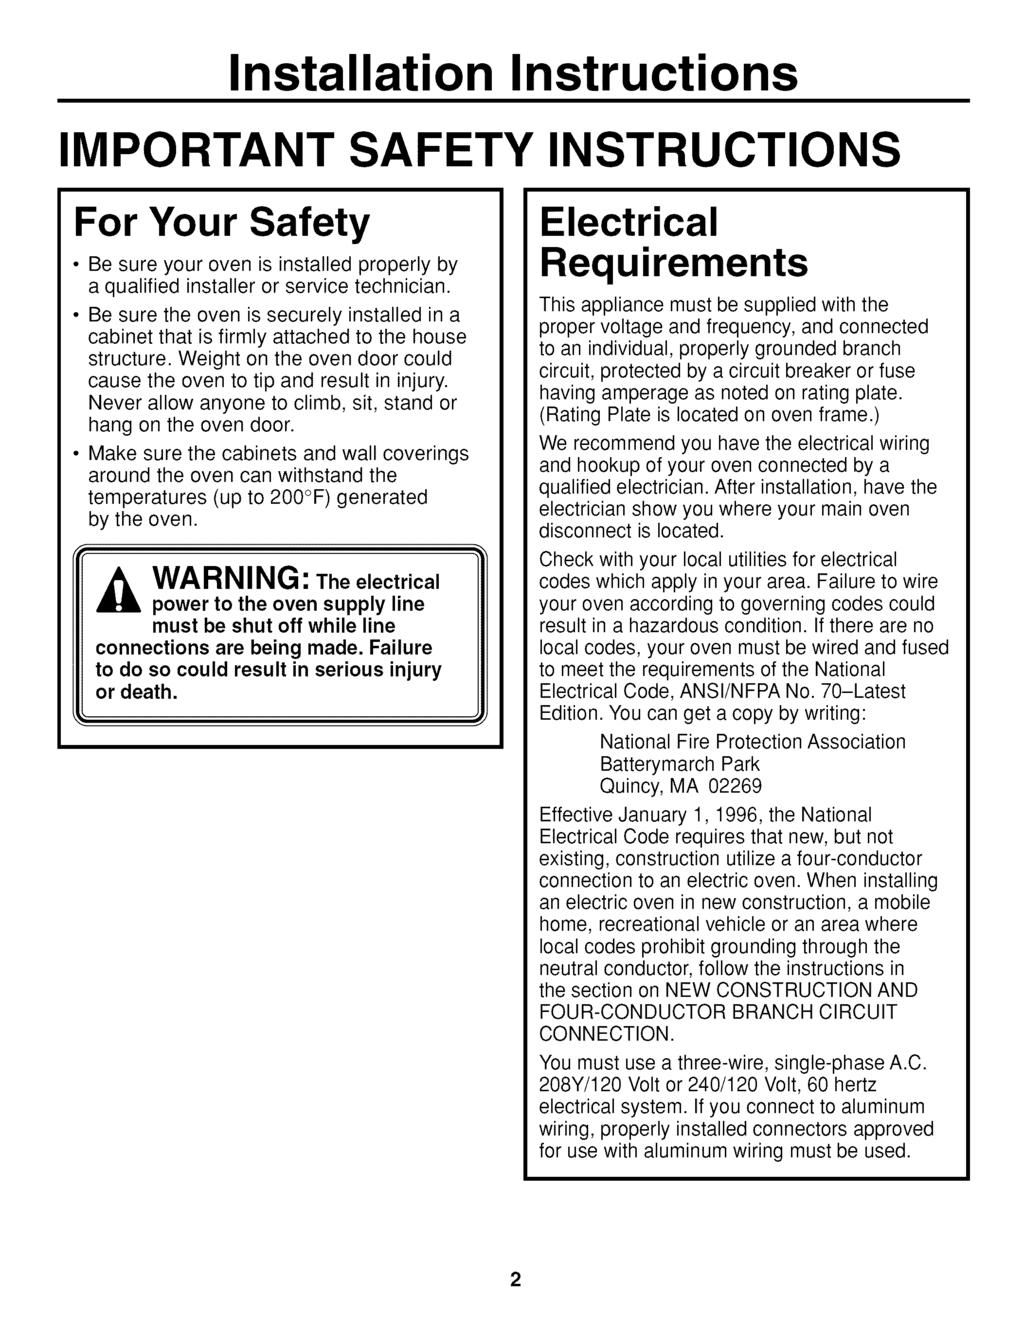 IMPORTANT SAFETY INSTRUCTIONS For Your Safety Be sure your oven is installed properly by a qualified installer or service technician.